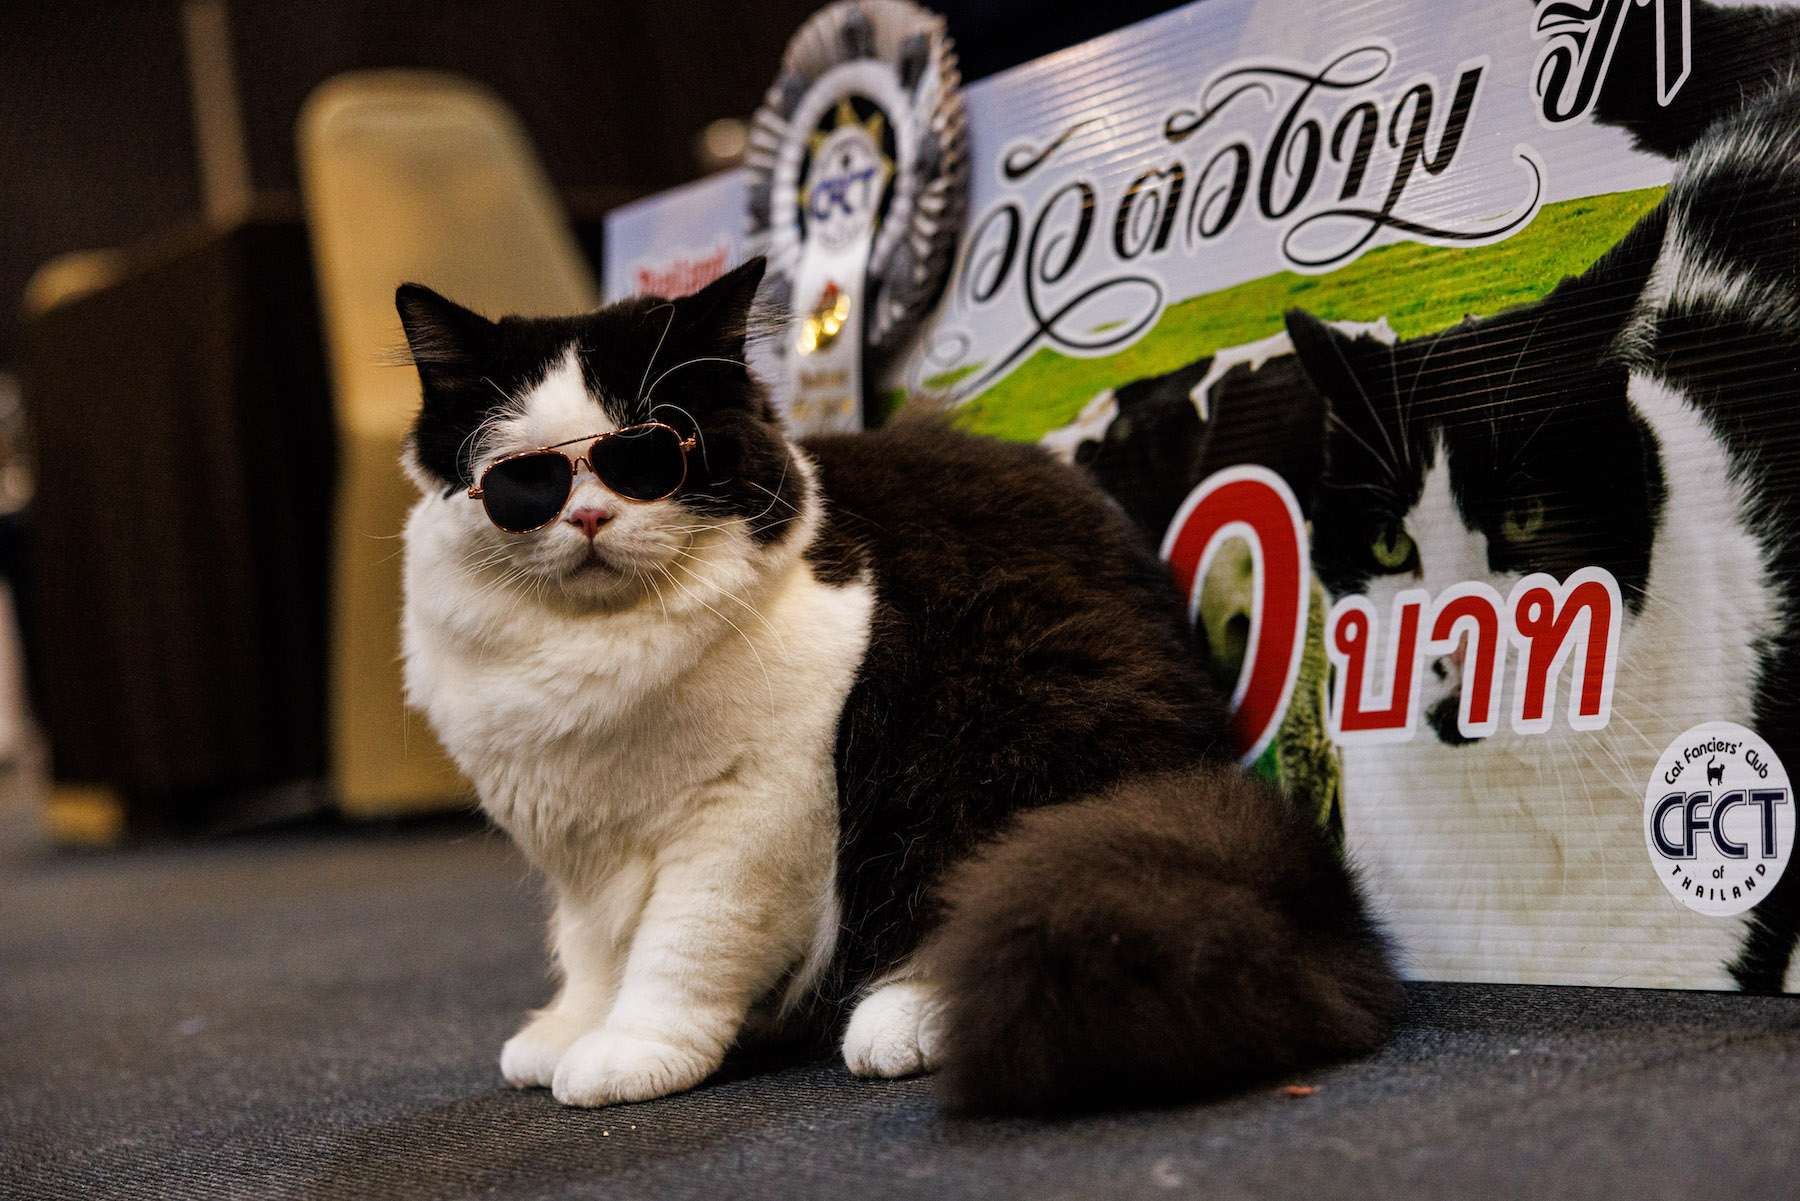 Thailand Held A “Cats Who Look Like Cows” Competition Where Cats Were Judged On Resemblance To Cows